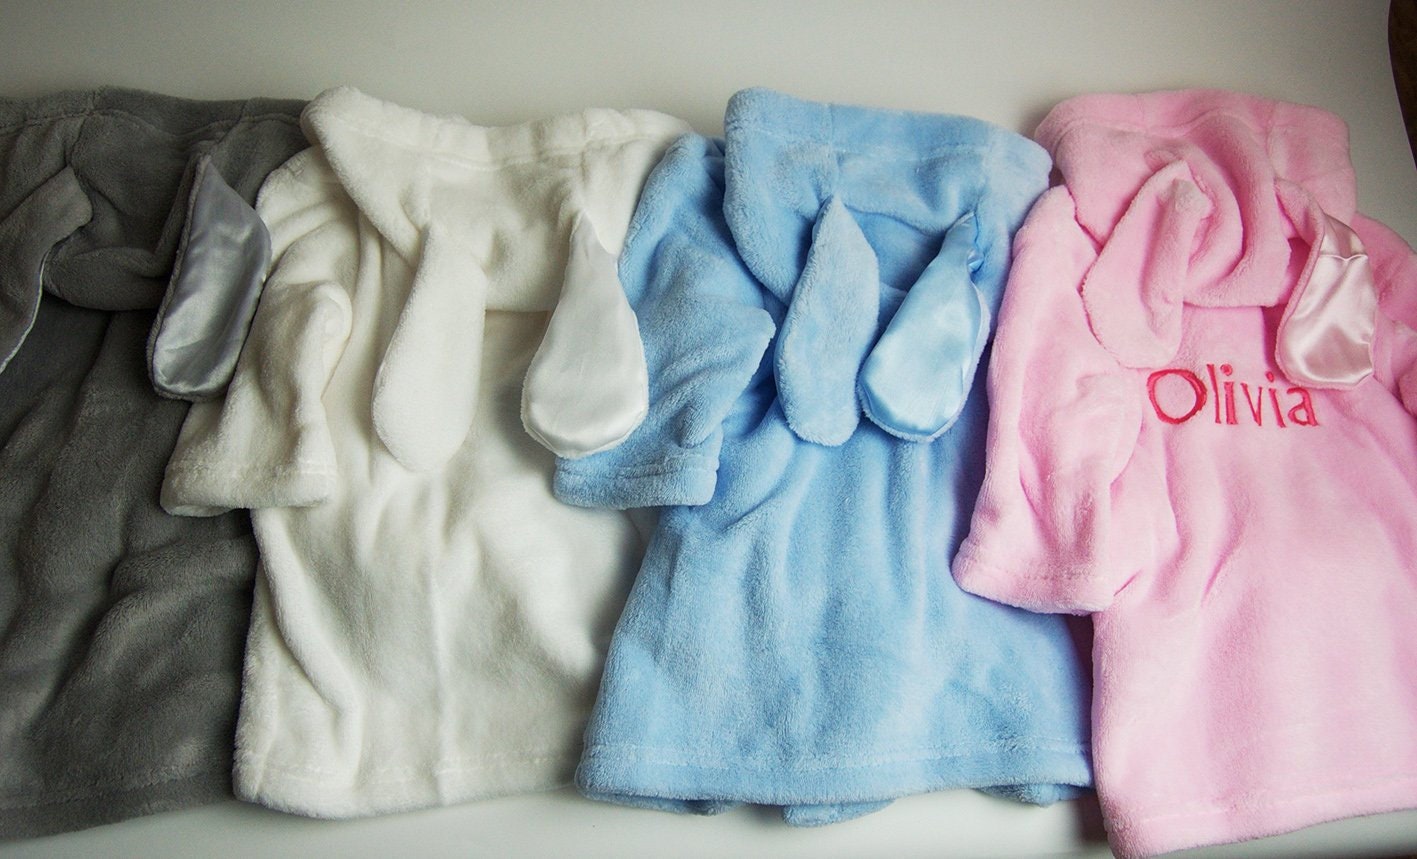 Personalised Embroidered Baby Dressing Gown Robe. Super Soft Fleece in Pink, White, Grey & Blue. Hooded With Ears Rabbit Teddy Bear